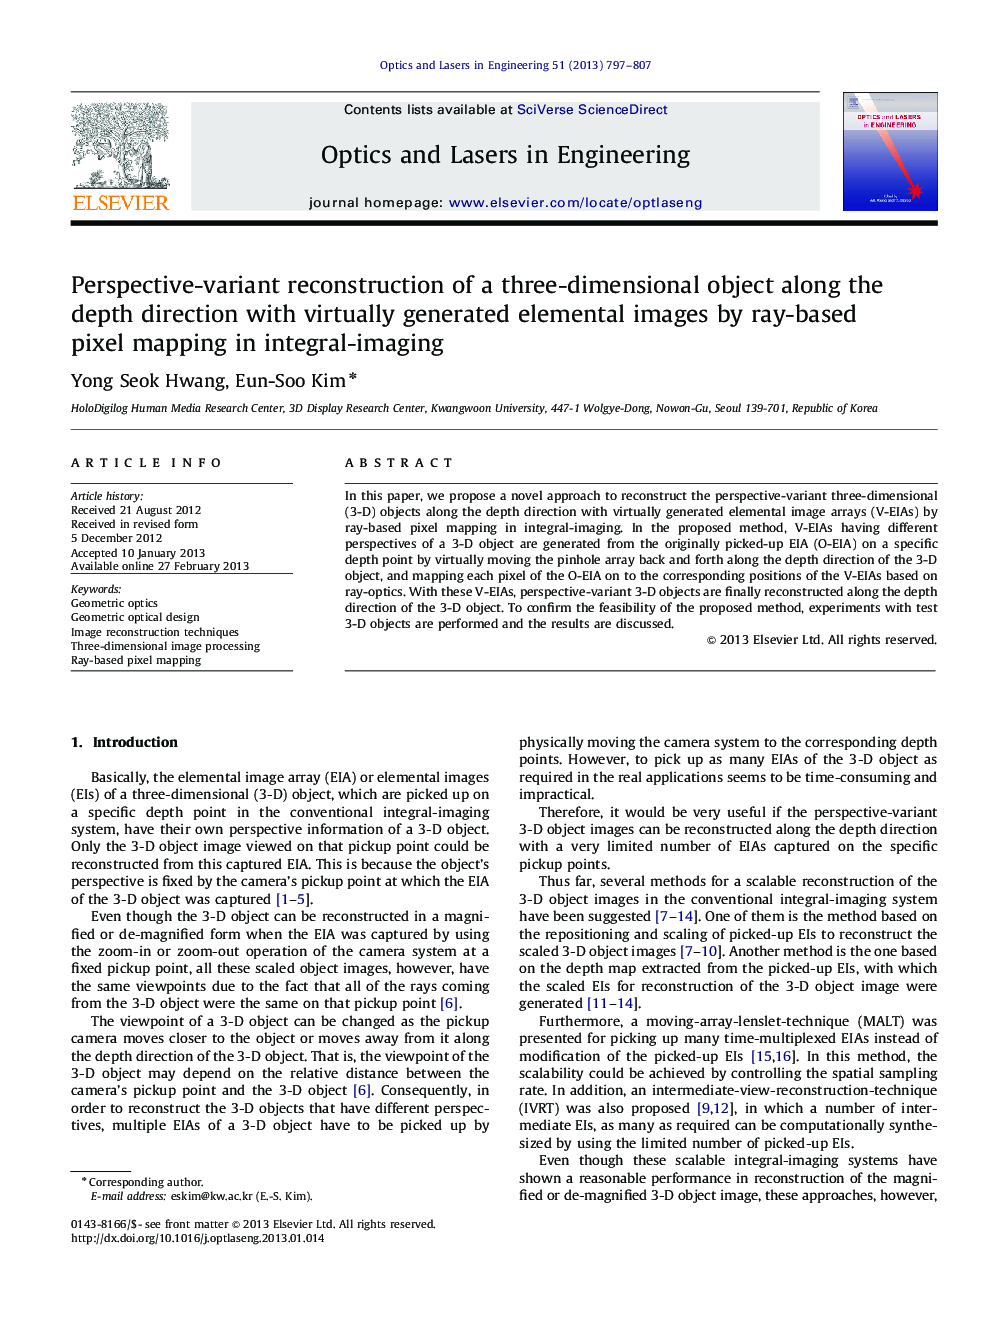 Perspective-variant reconstruction of a three-dimensional object along the depth direction with virtually generated elemental images by ray-based pixel mapping in integral-imaging